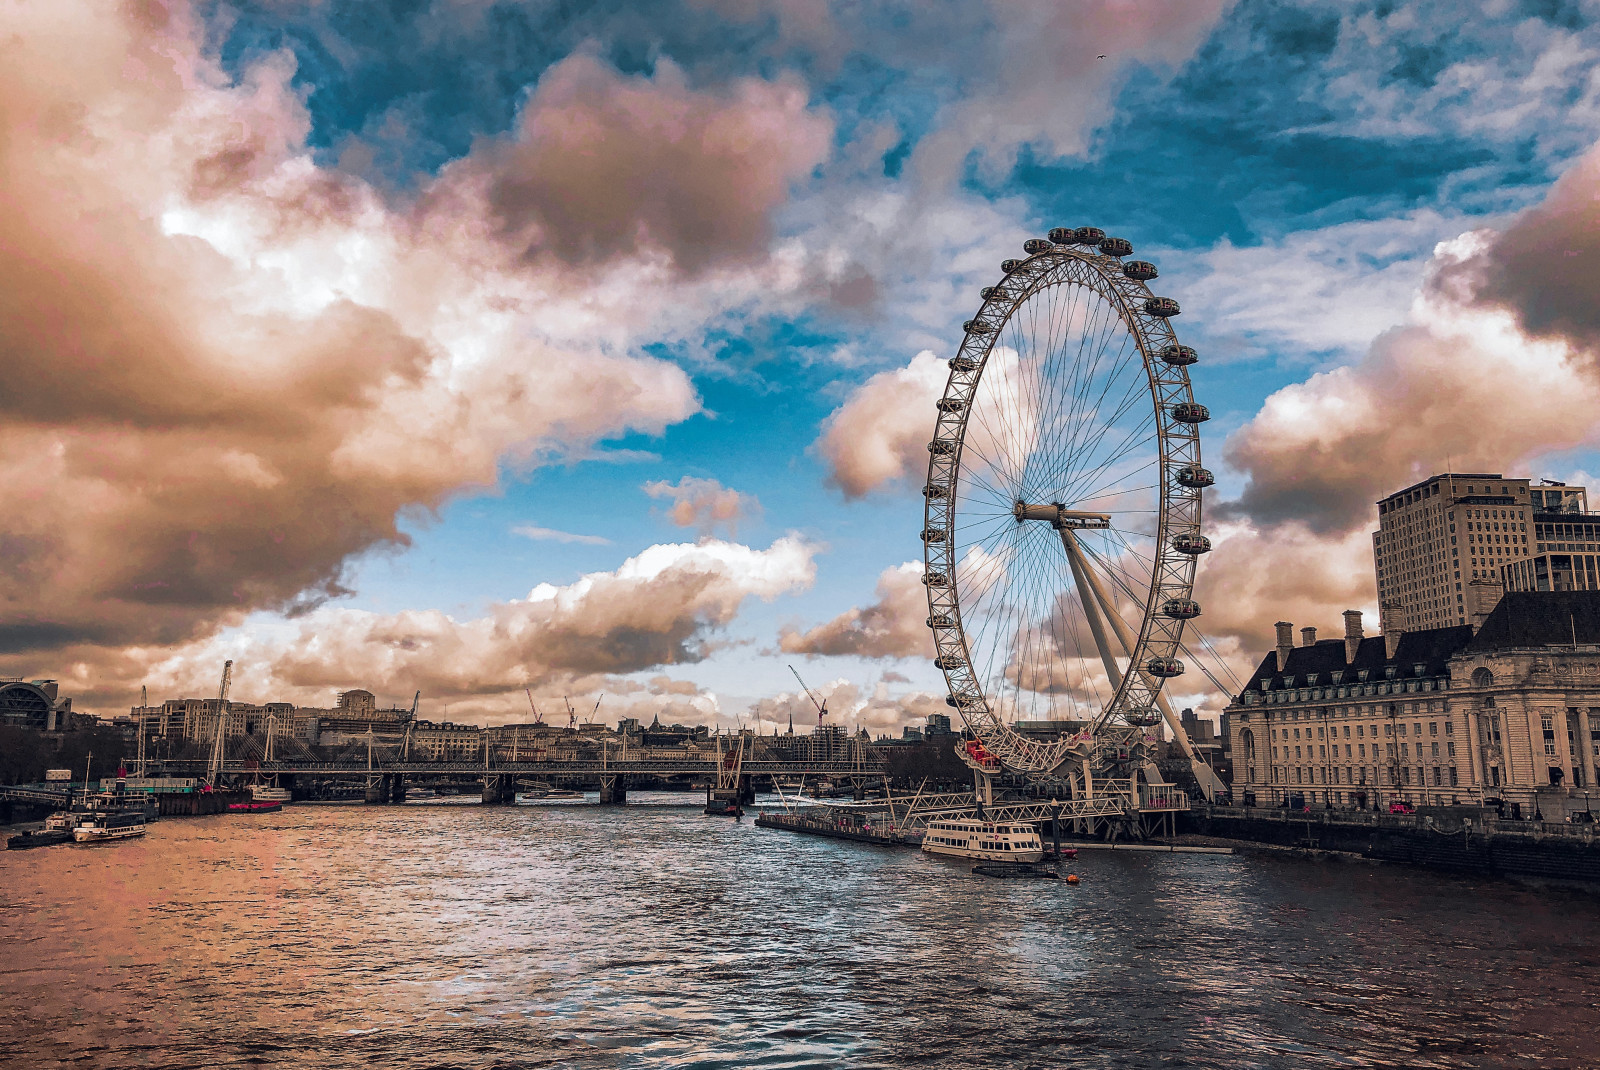 The London Eye in London, United Kingdom, England with pink clouds and the river Thames